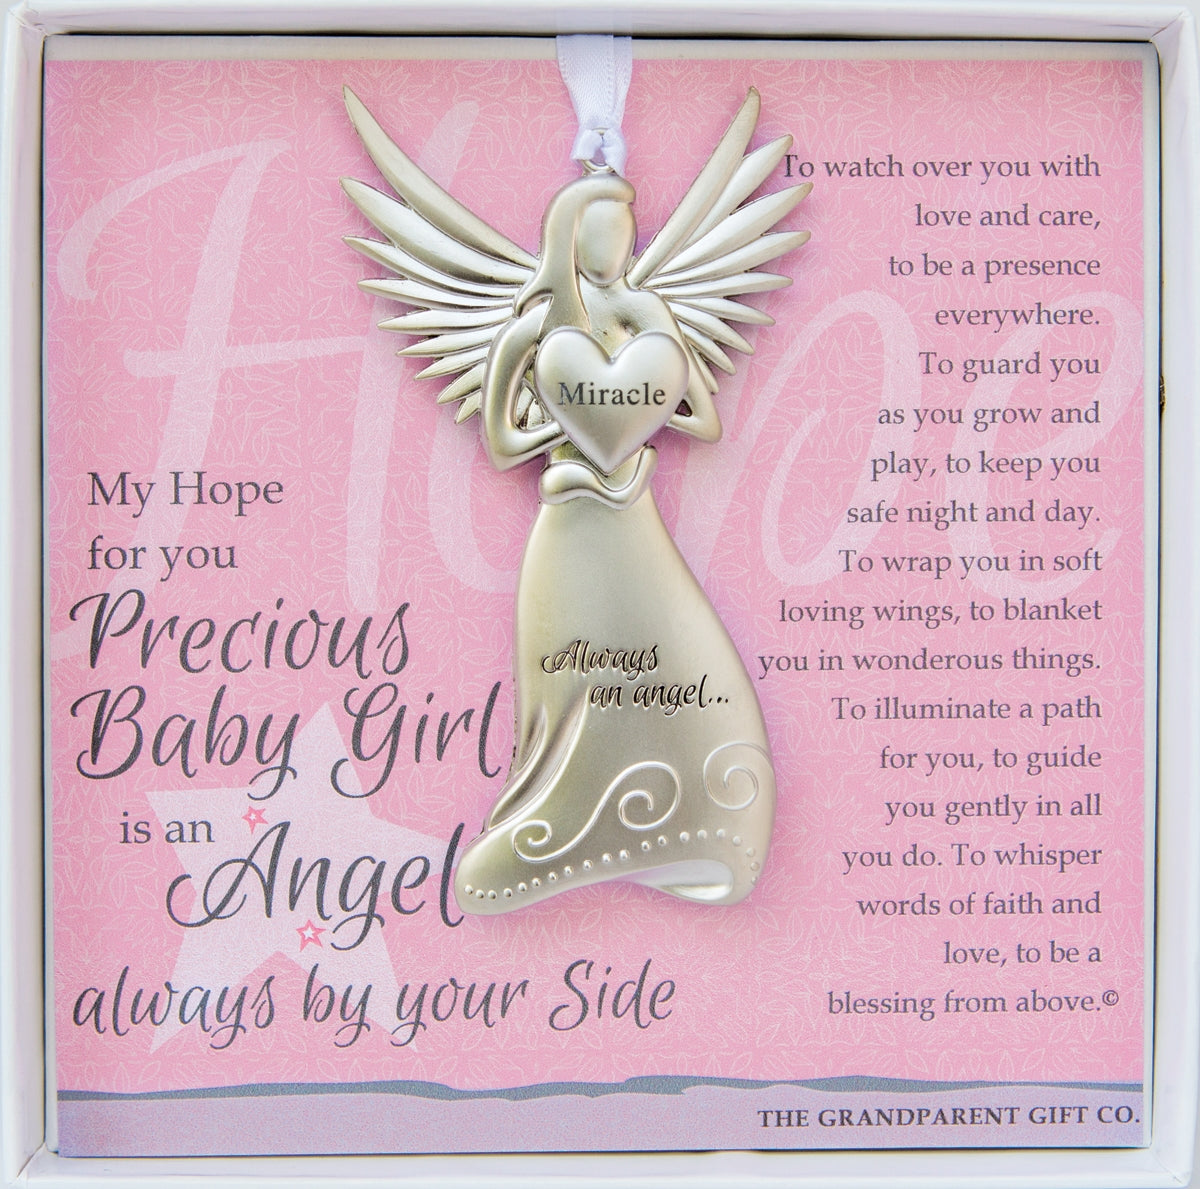 Baby Girl Gift- 4" metal miracle angel ornament with "Precious Baby Girl" poem in white box with clear lid